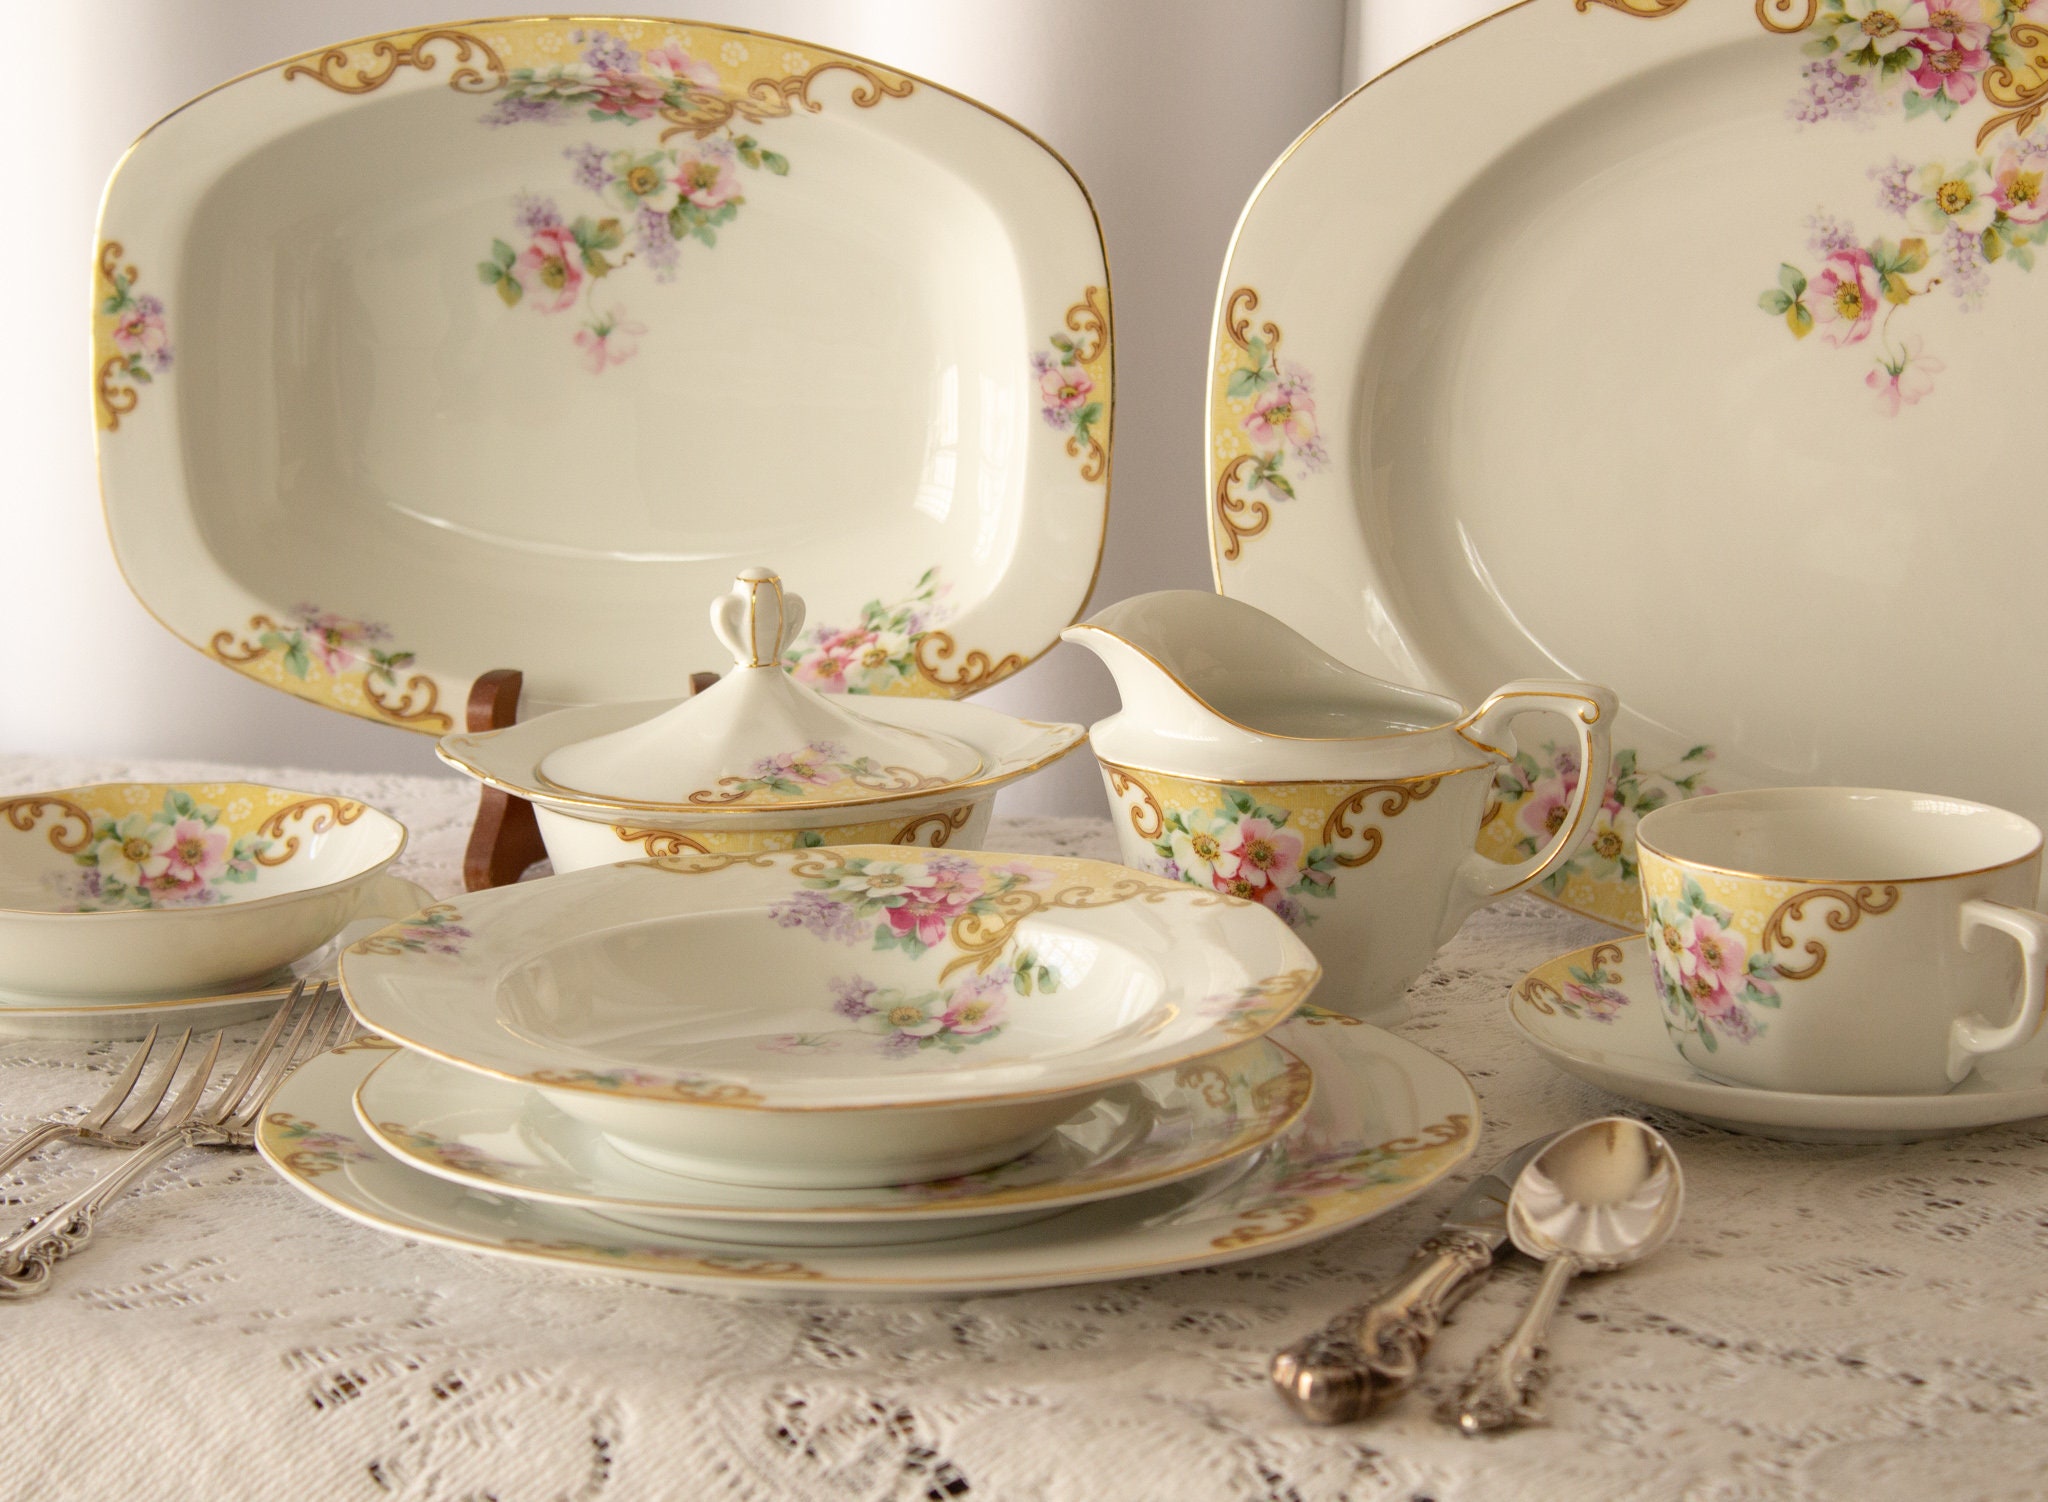 - Dinnerware Circa Settings Windemere 1920s Gold Etsy 22K Place Trim for Eight China Thun